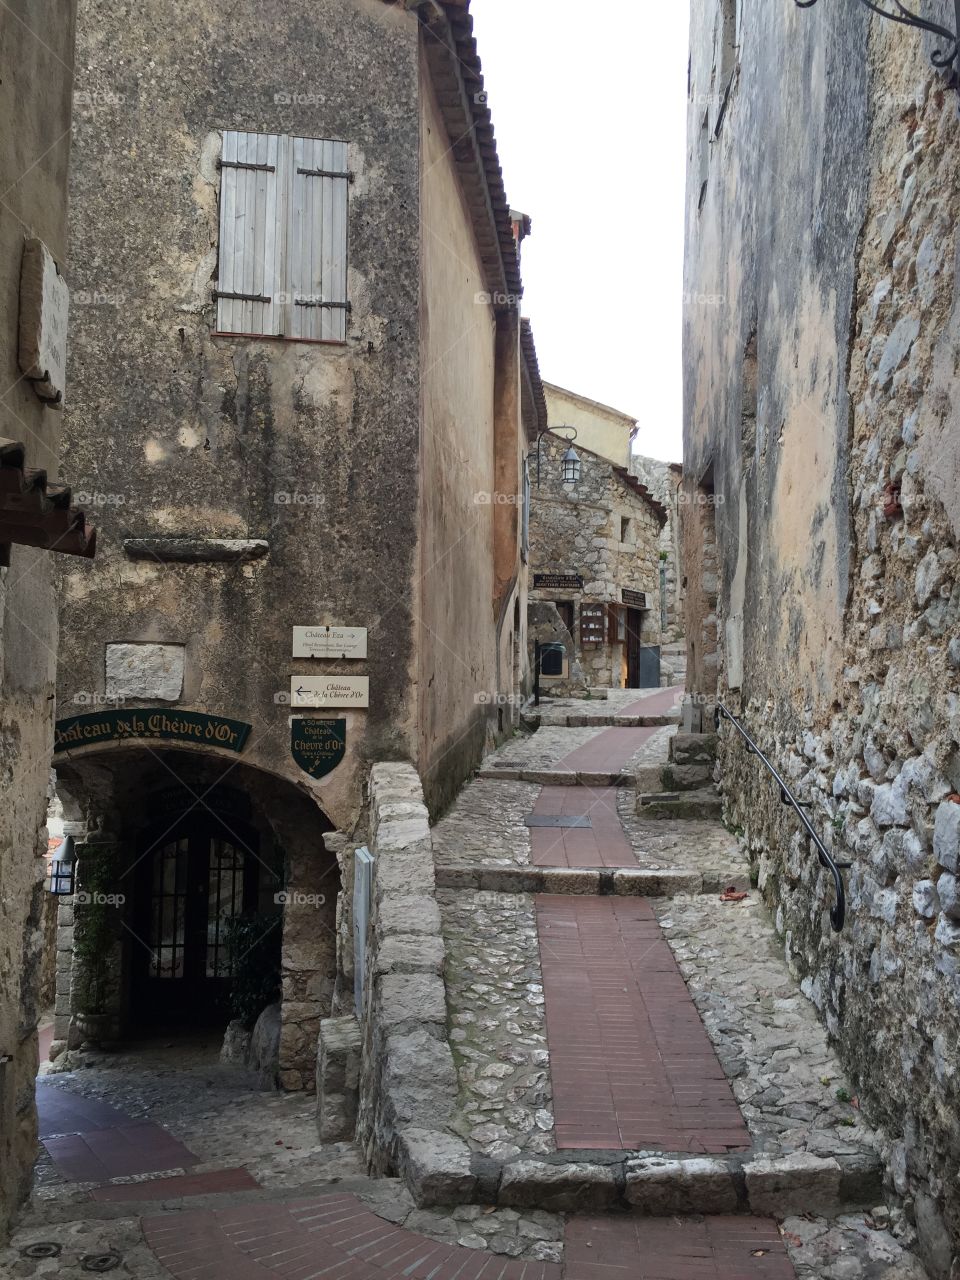 Narrow alley with old building in town